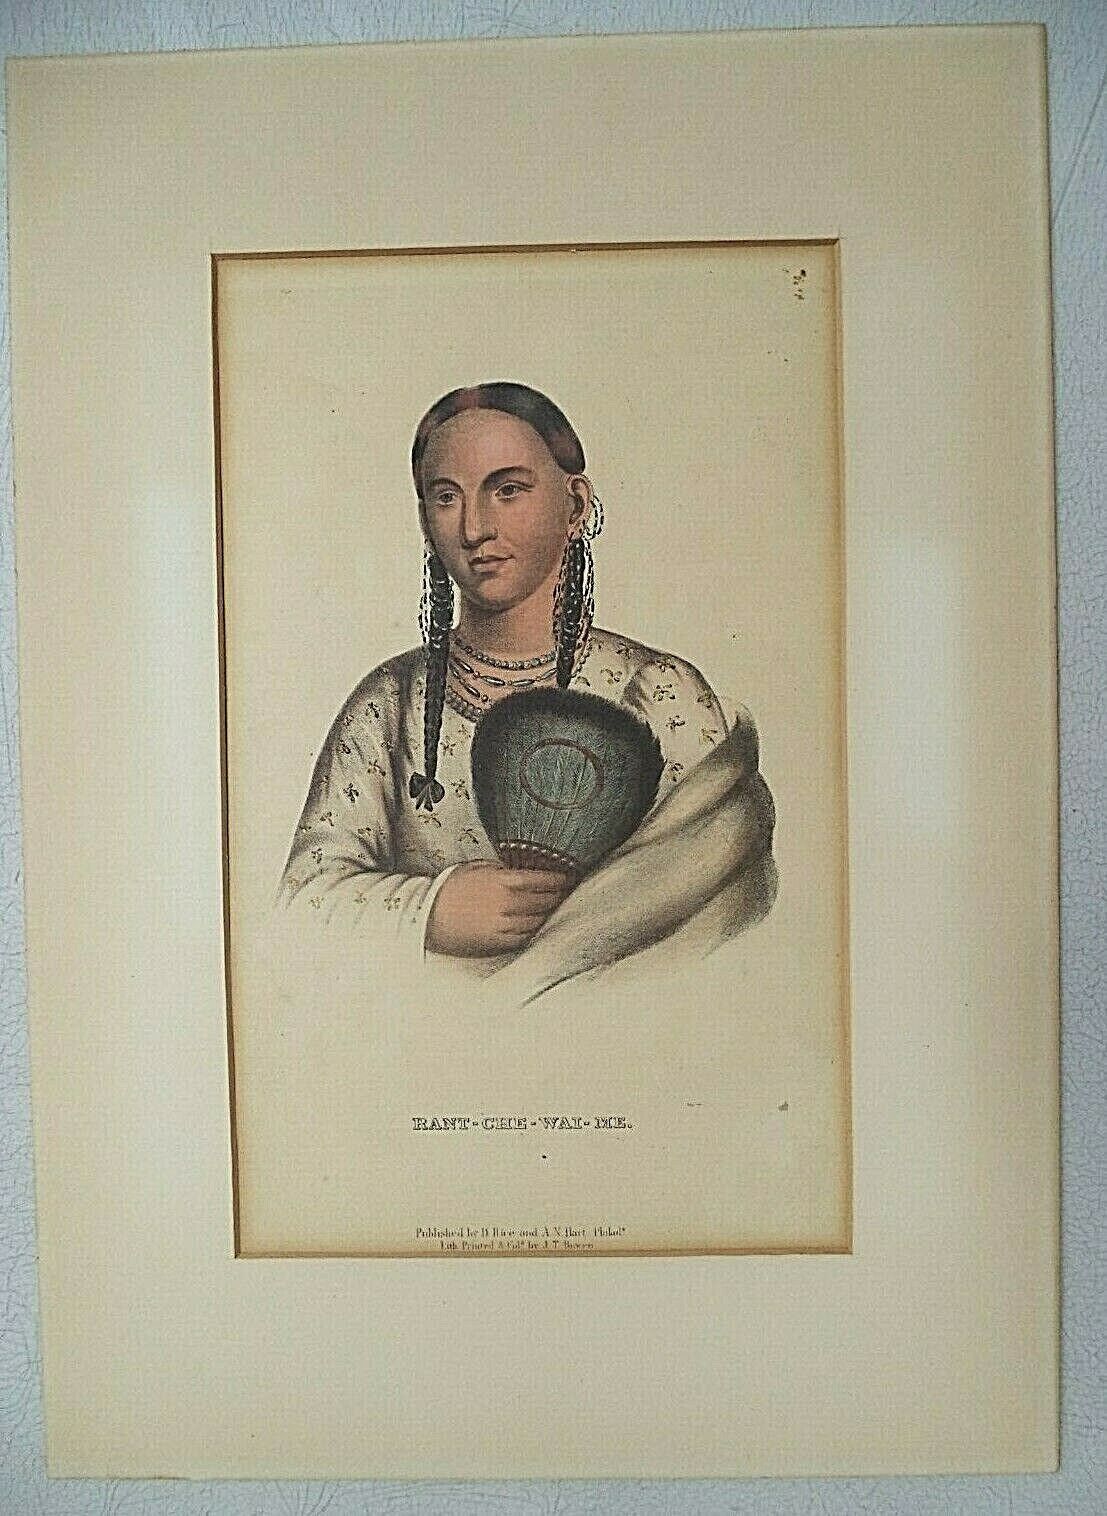 Original Old Rice & Hart Hand Colored Lithograph Indian Rant-che-wai-me